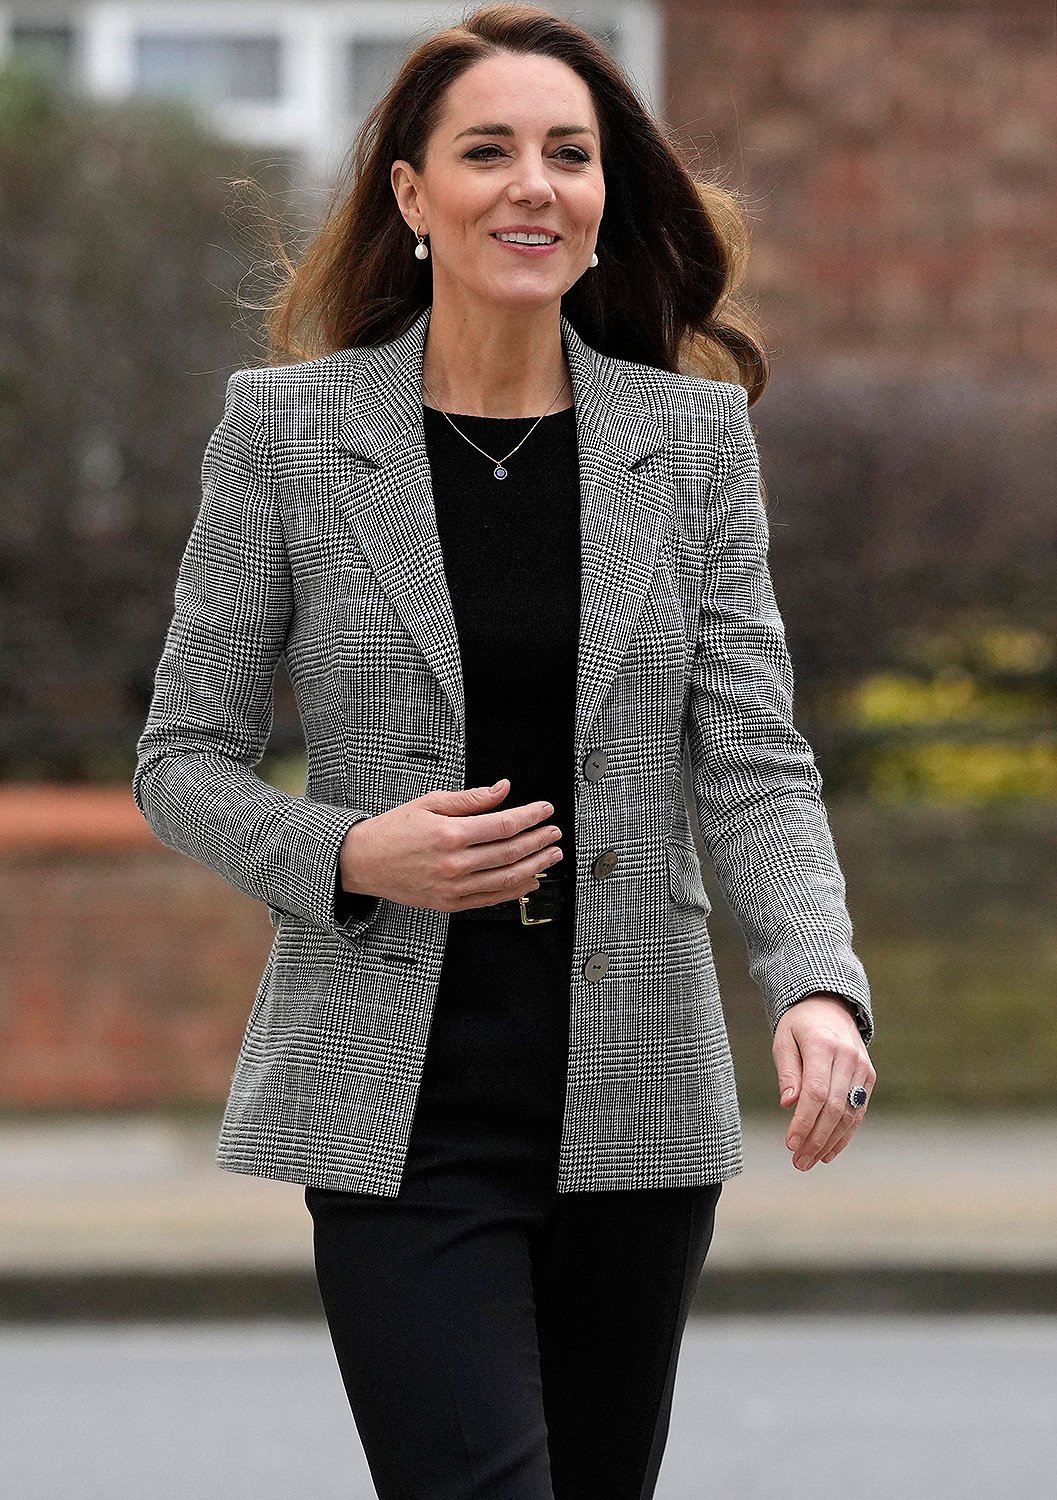 The Duchess of Cambridge Visits PACT — Royal Portraits Gallery